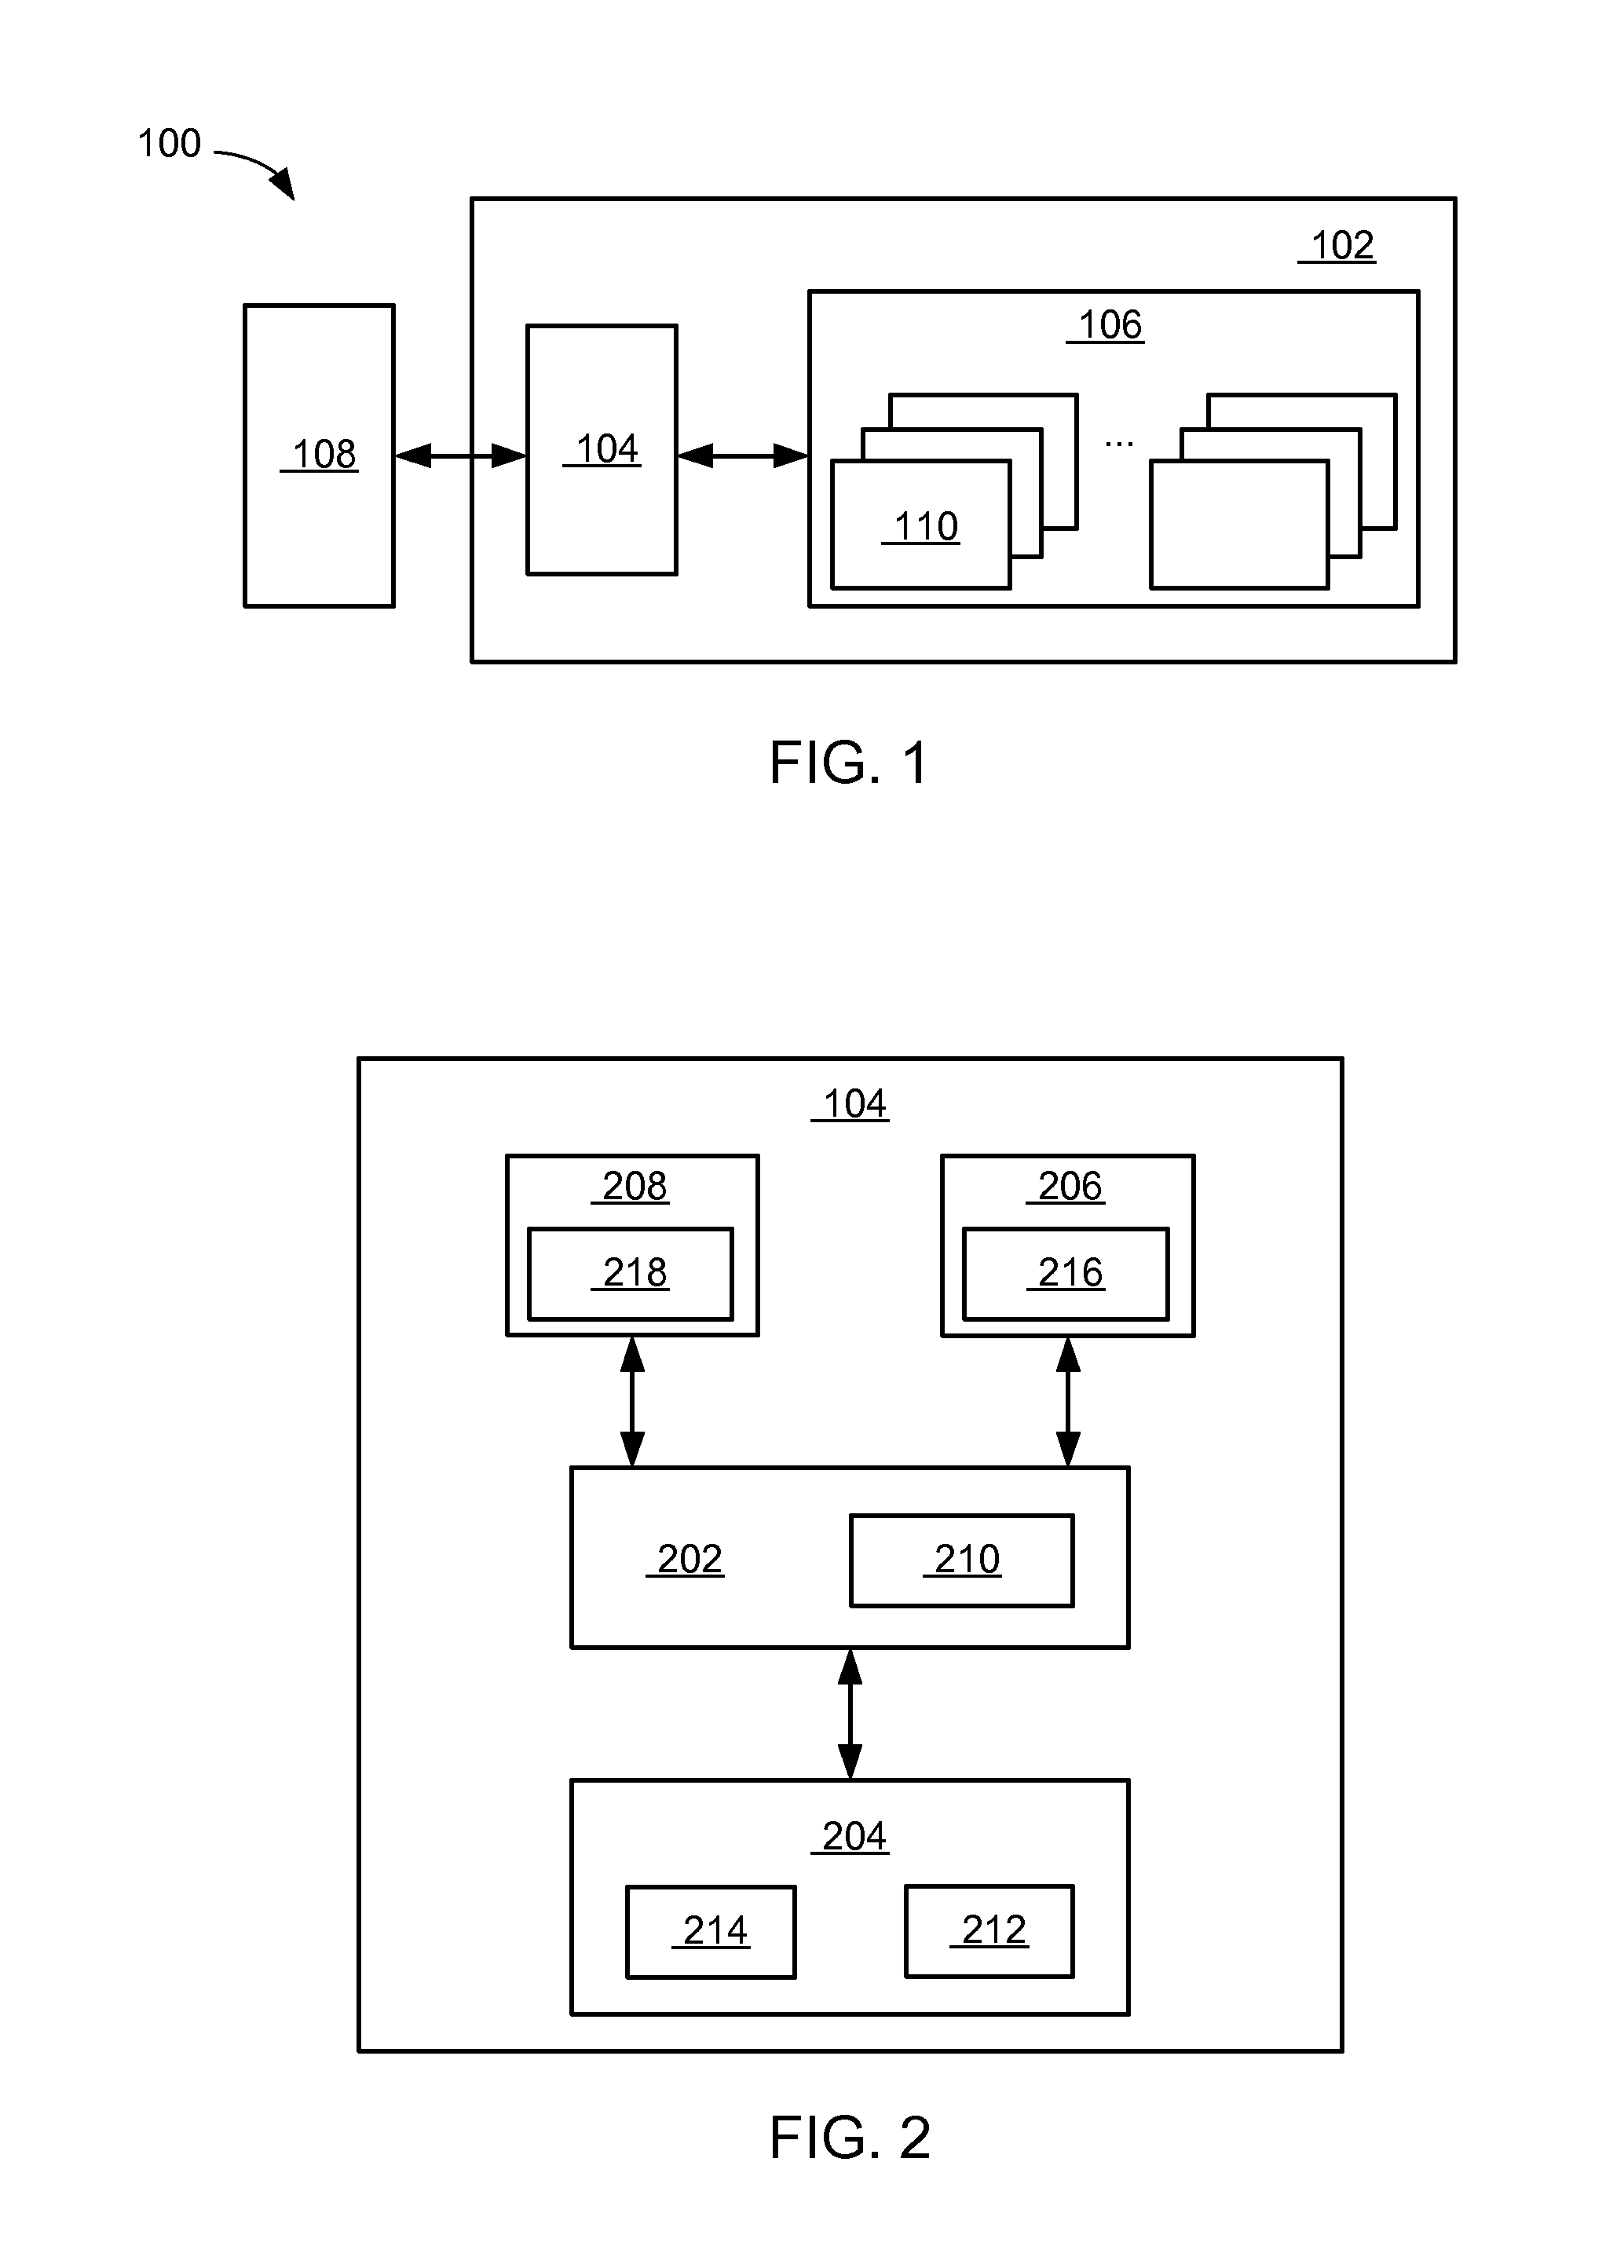 Storage control system with data management mechanism and method of operation thereof